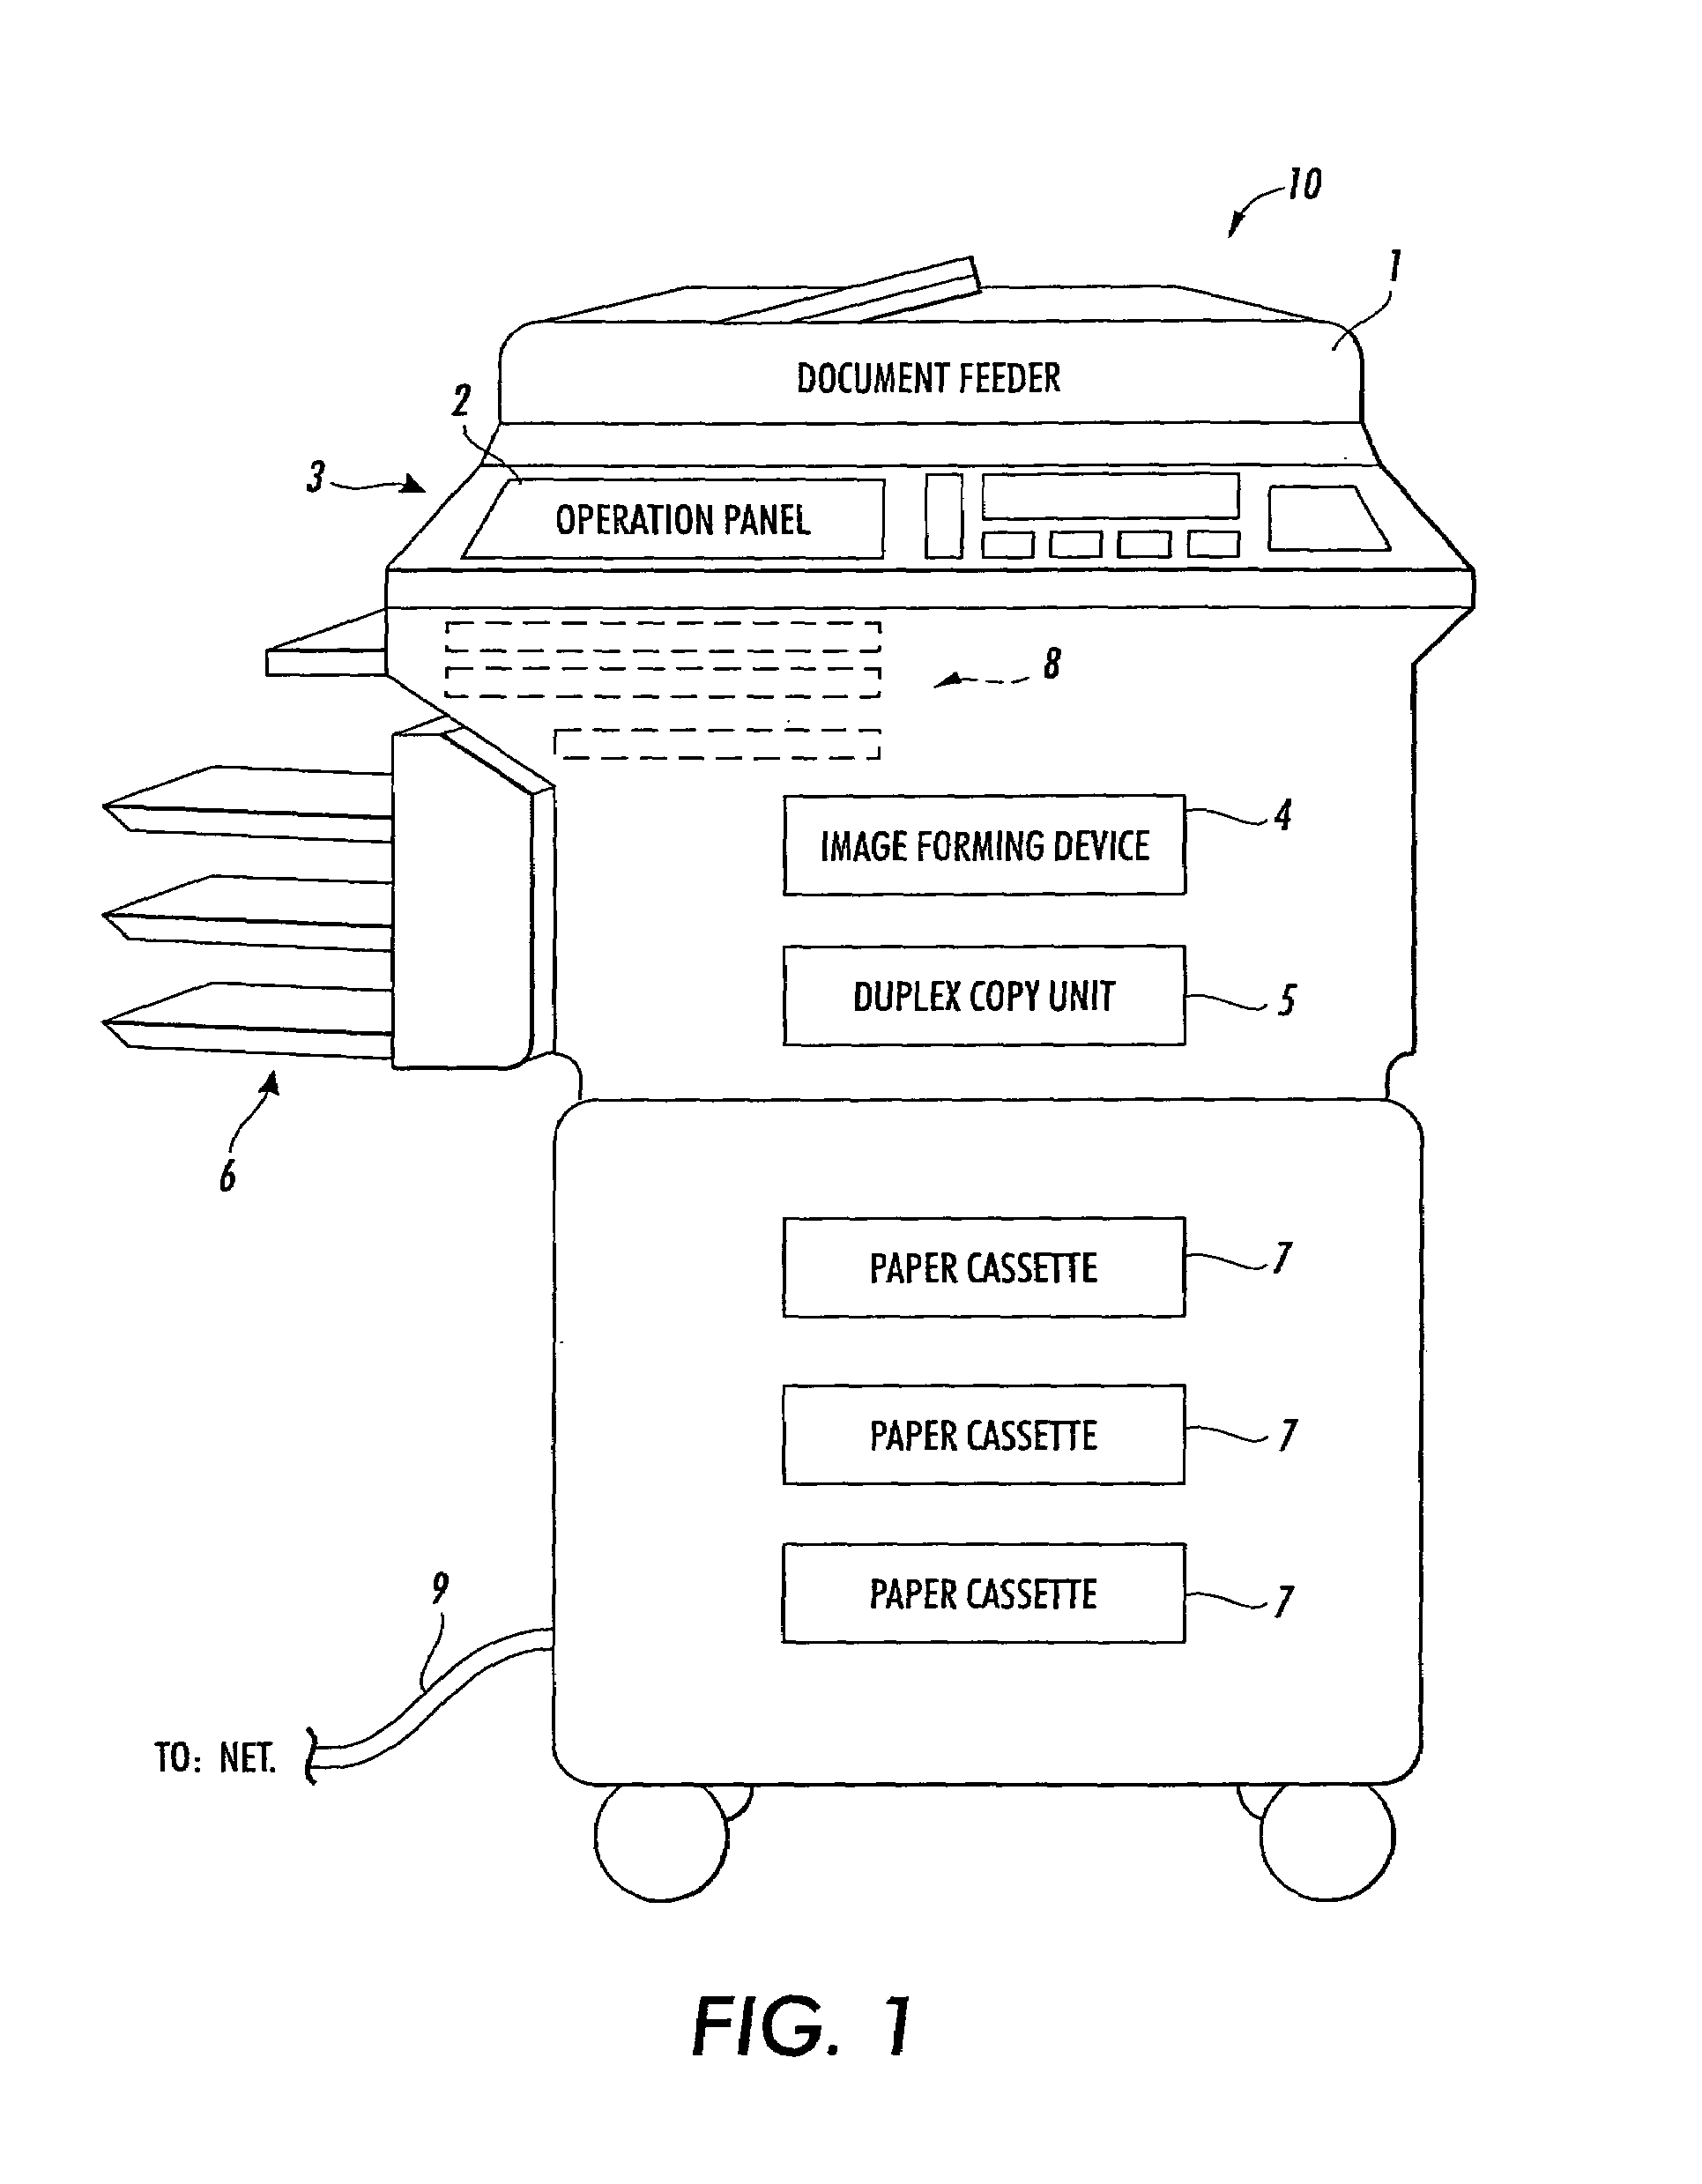 System and method for merging together jobs in a multi-platform printing system when one of the platforms is in a degraded mode